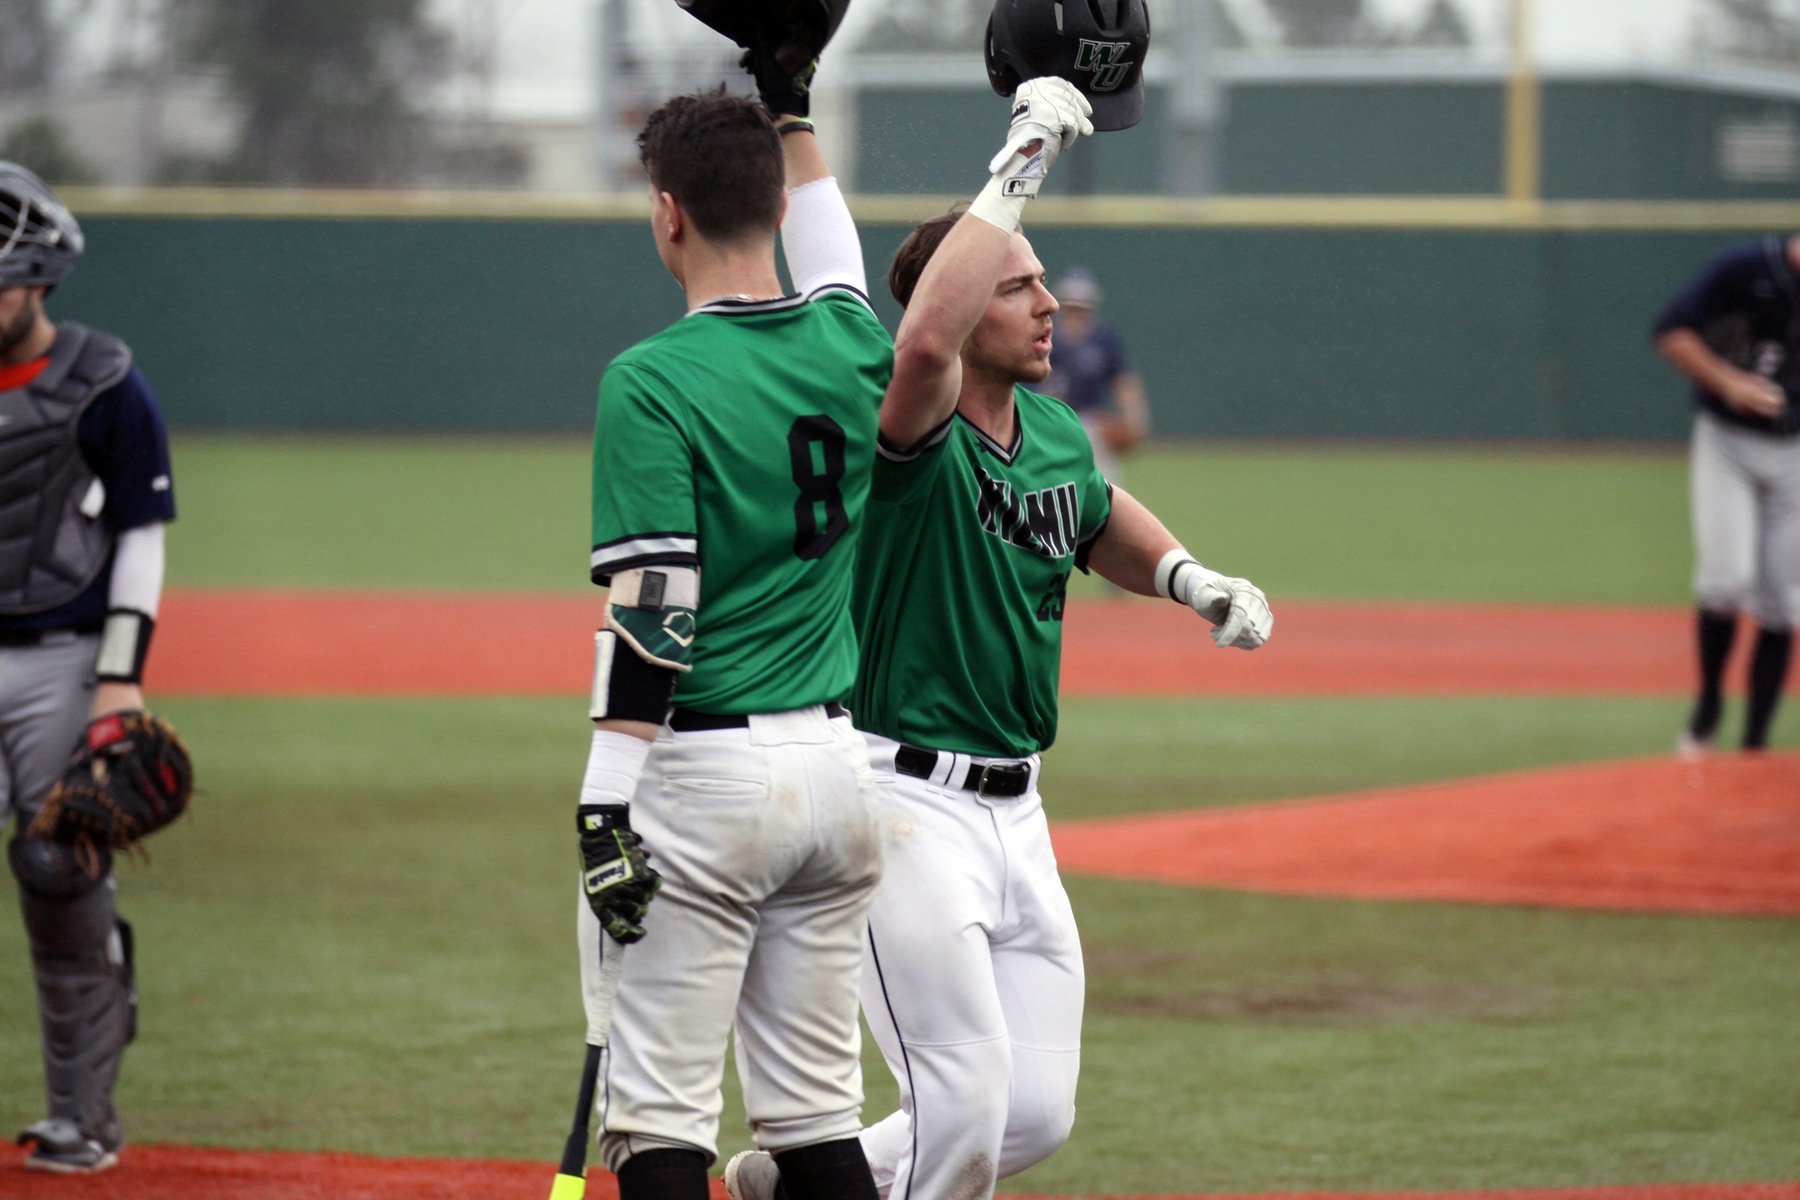 Copyright 2019; Wilmington University. All rights reserved. File photo of Luke Johnson following a home run in Myrtle Beach. Photo by Dan Lauletta. February 24, 2019 vs. Molloy at Myrtle Beach, S.C.